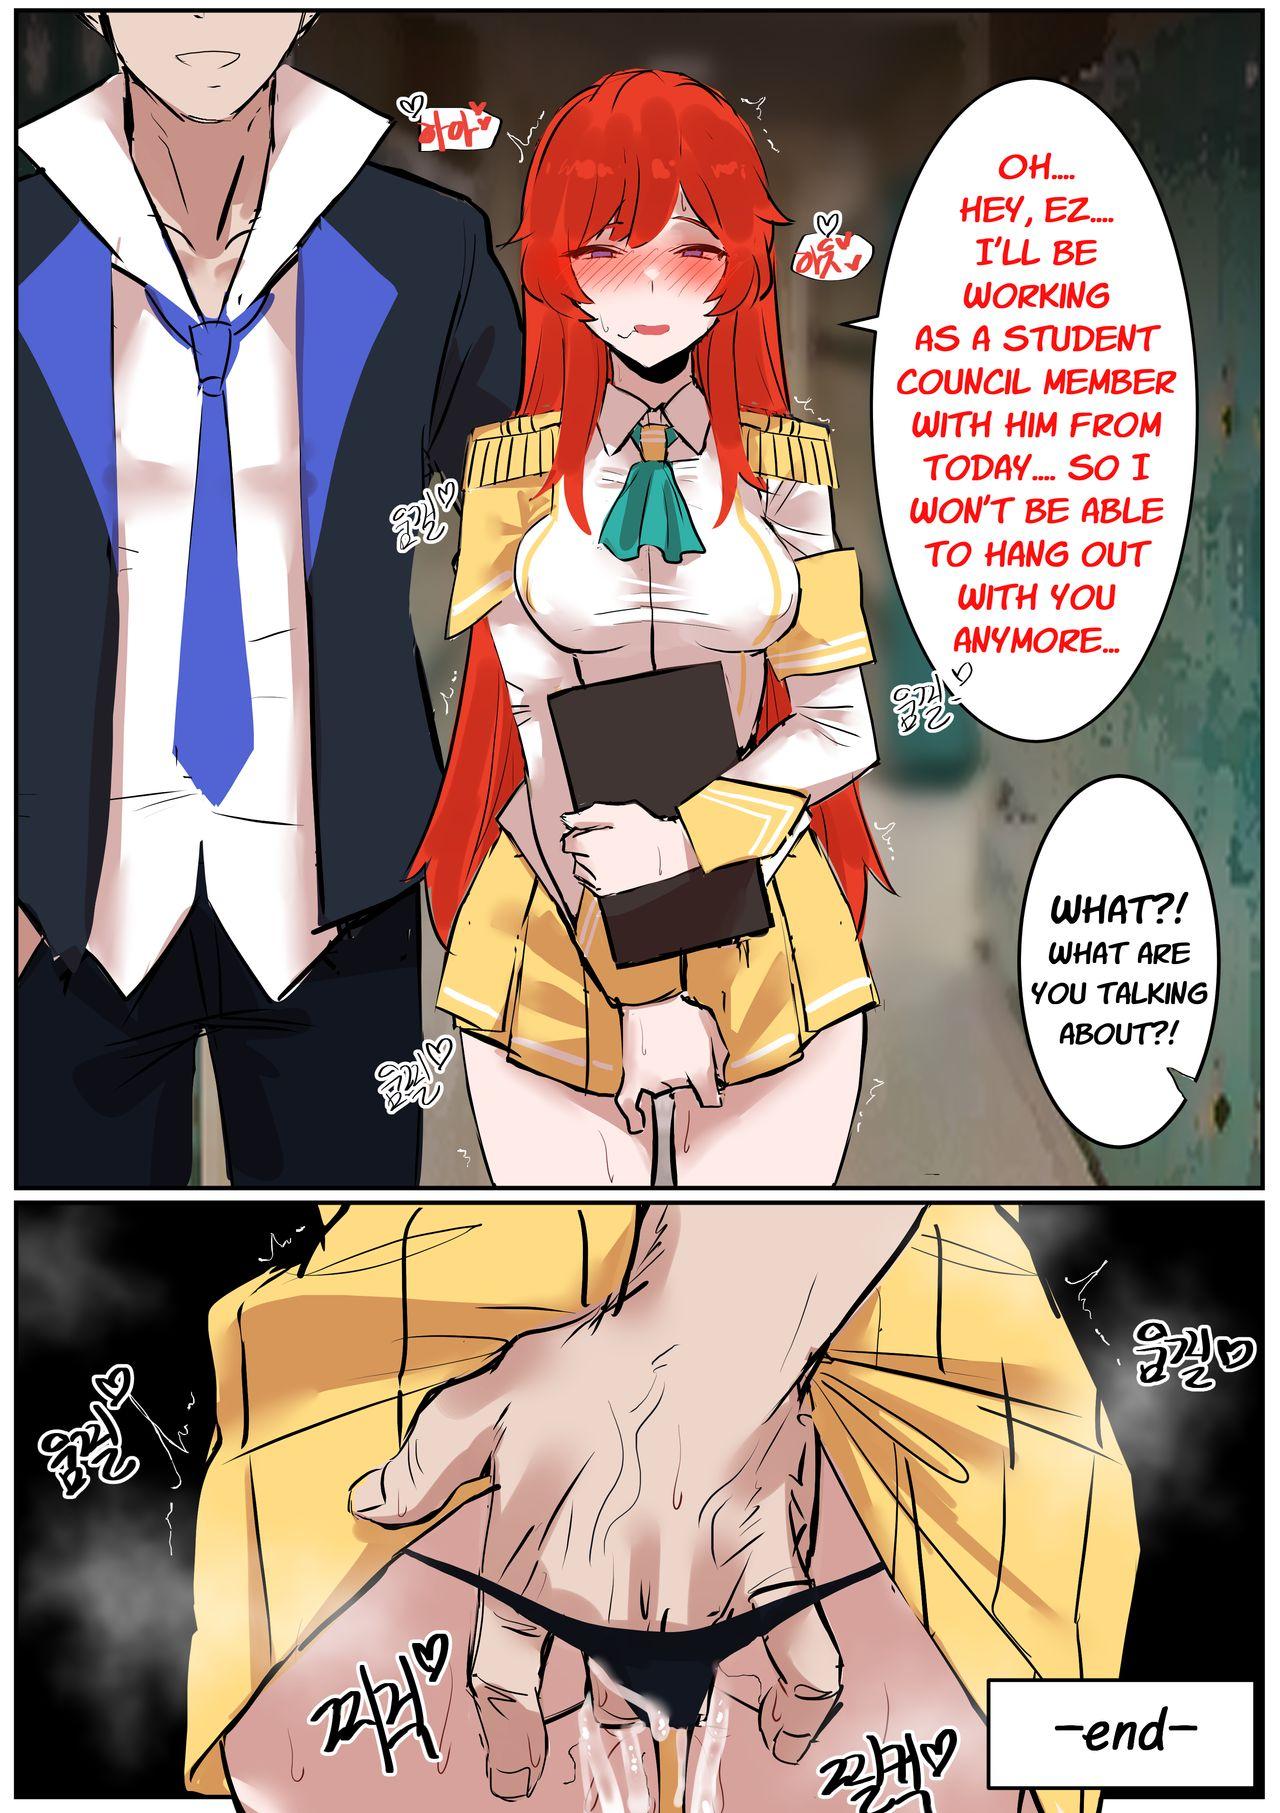 Rimming Battle Academia Lux - League of legends Farting - Page 17